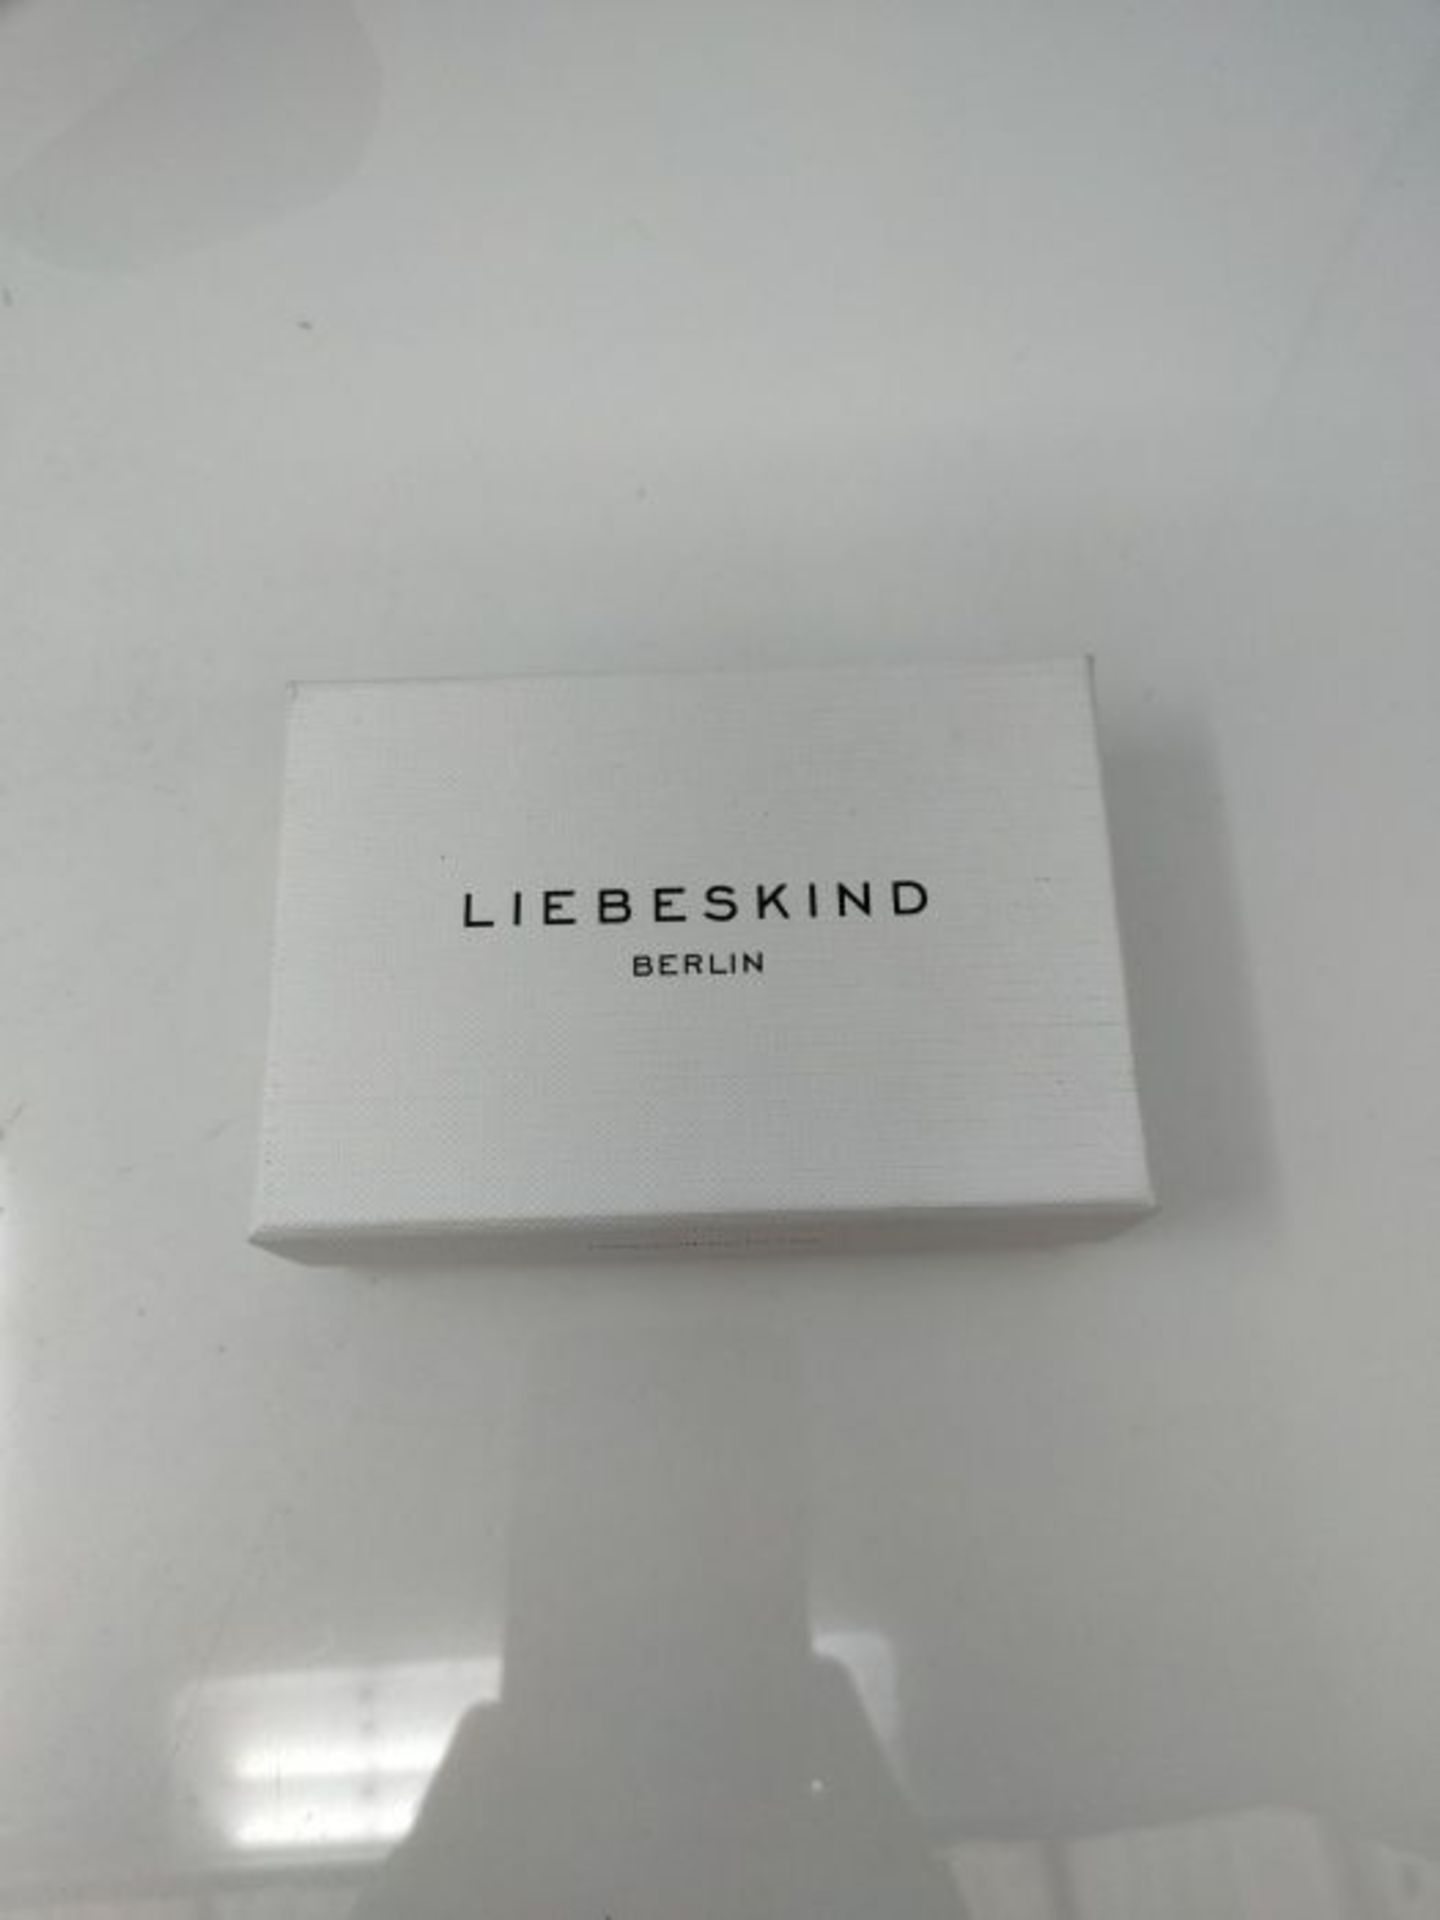 [CRACKED] LIEBESKIND BERLIN Beads 6mm mit Logotag in Edelstahl - Image 2 of 3